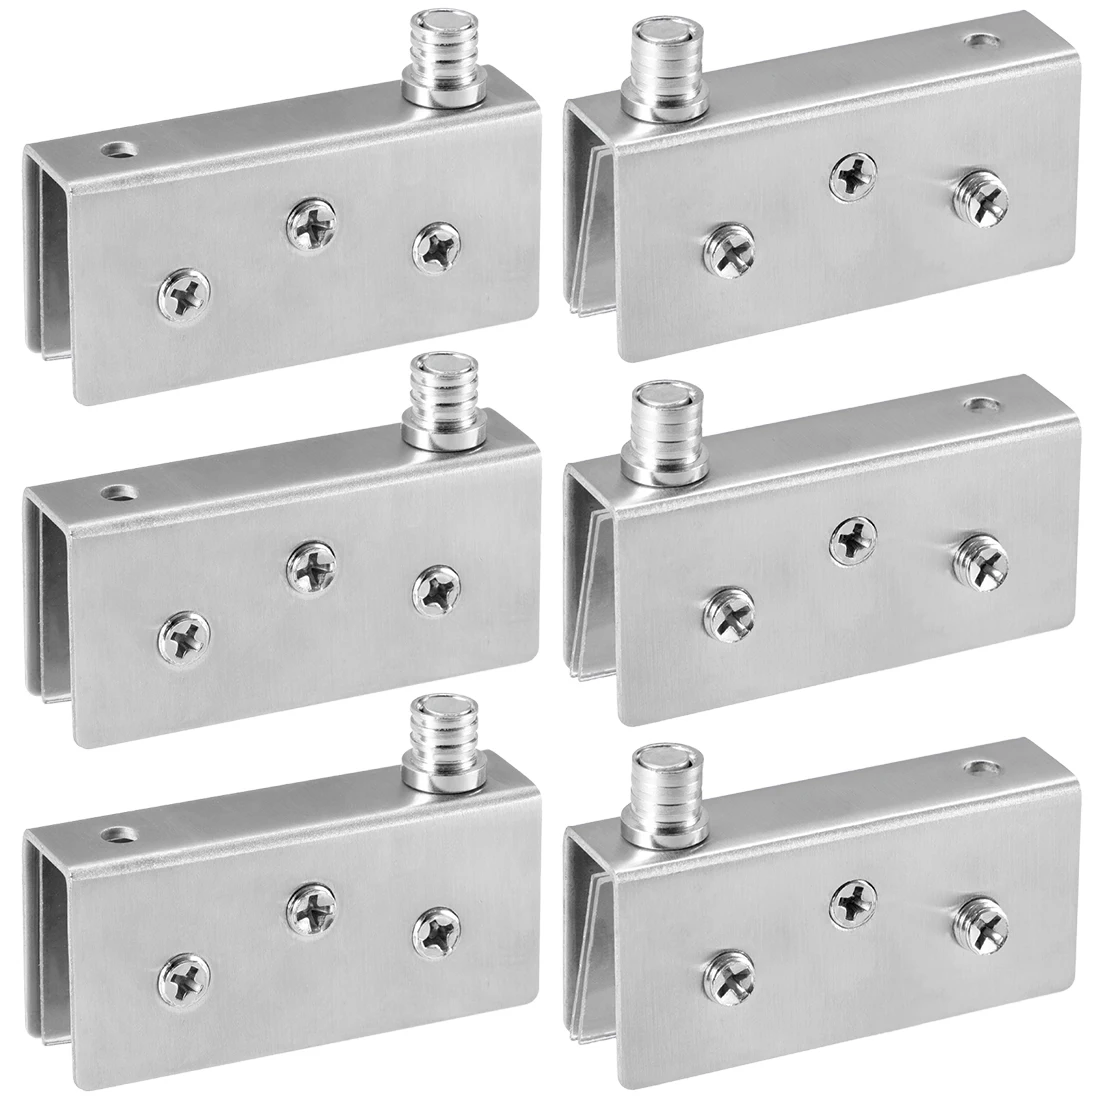 uxcell® Glass Hinge Stainless Steel Glass Door Pivot Hinge Glass Clamp Silver Tone 40x13x20mm 3 Pair